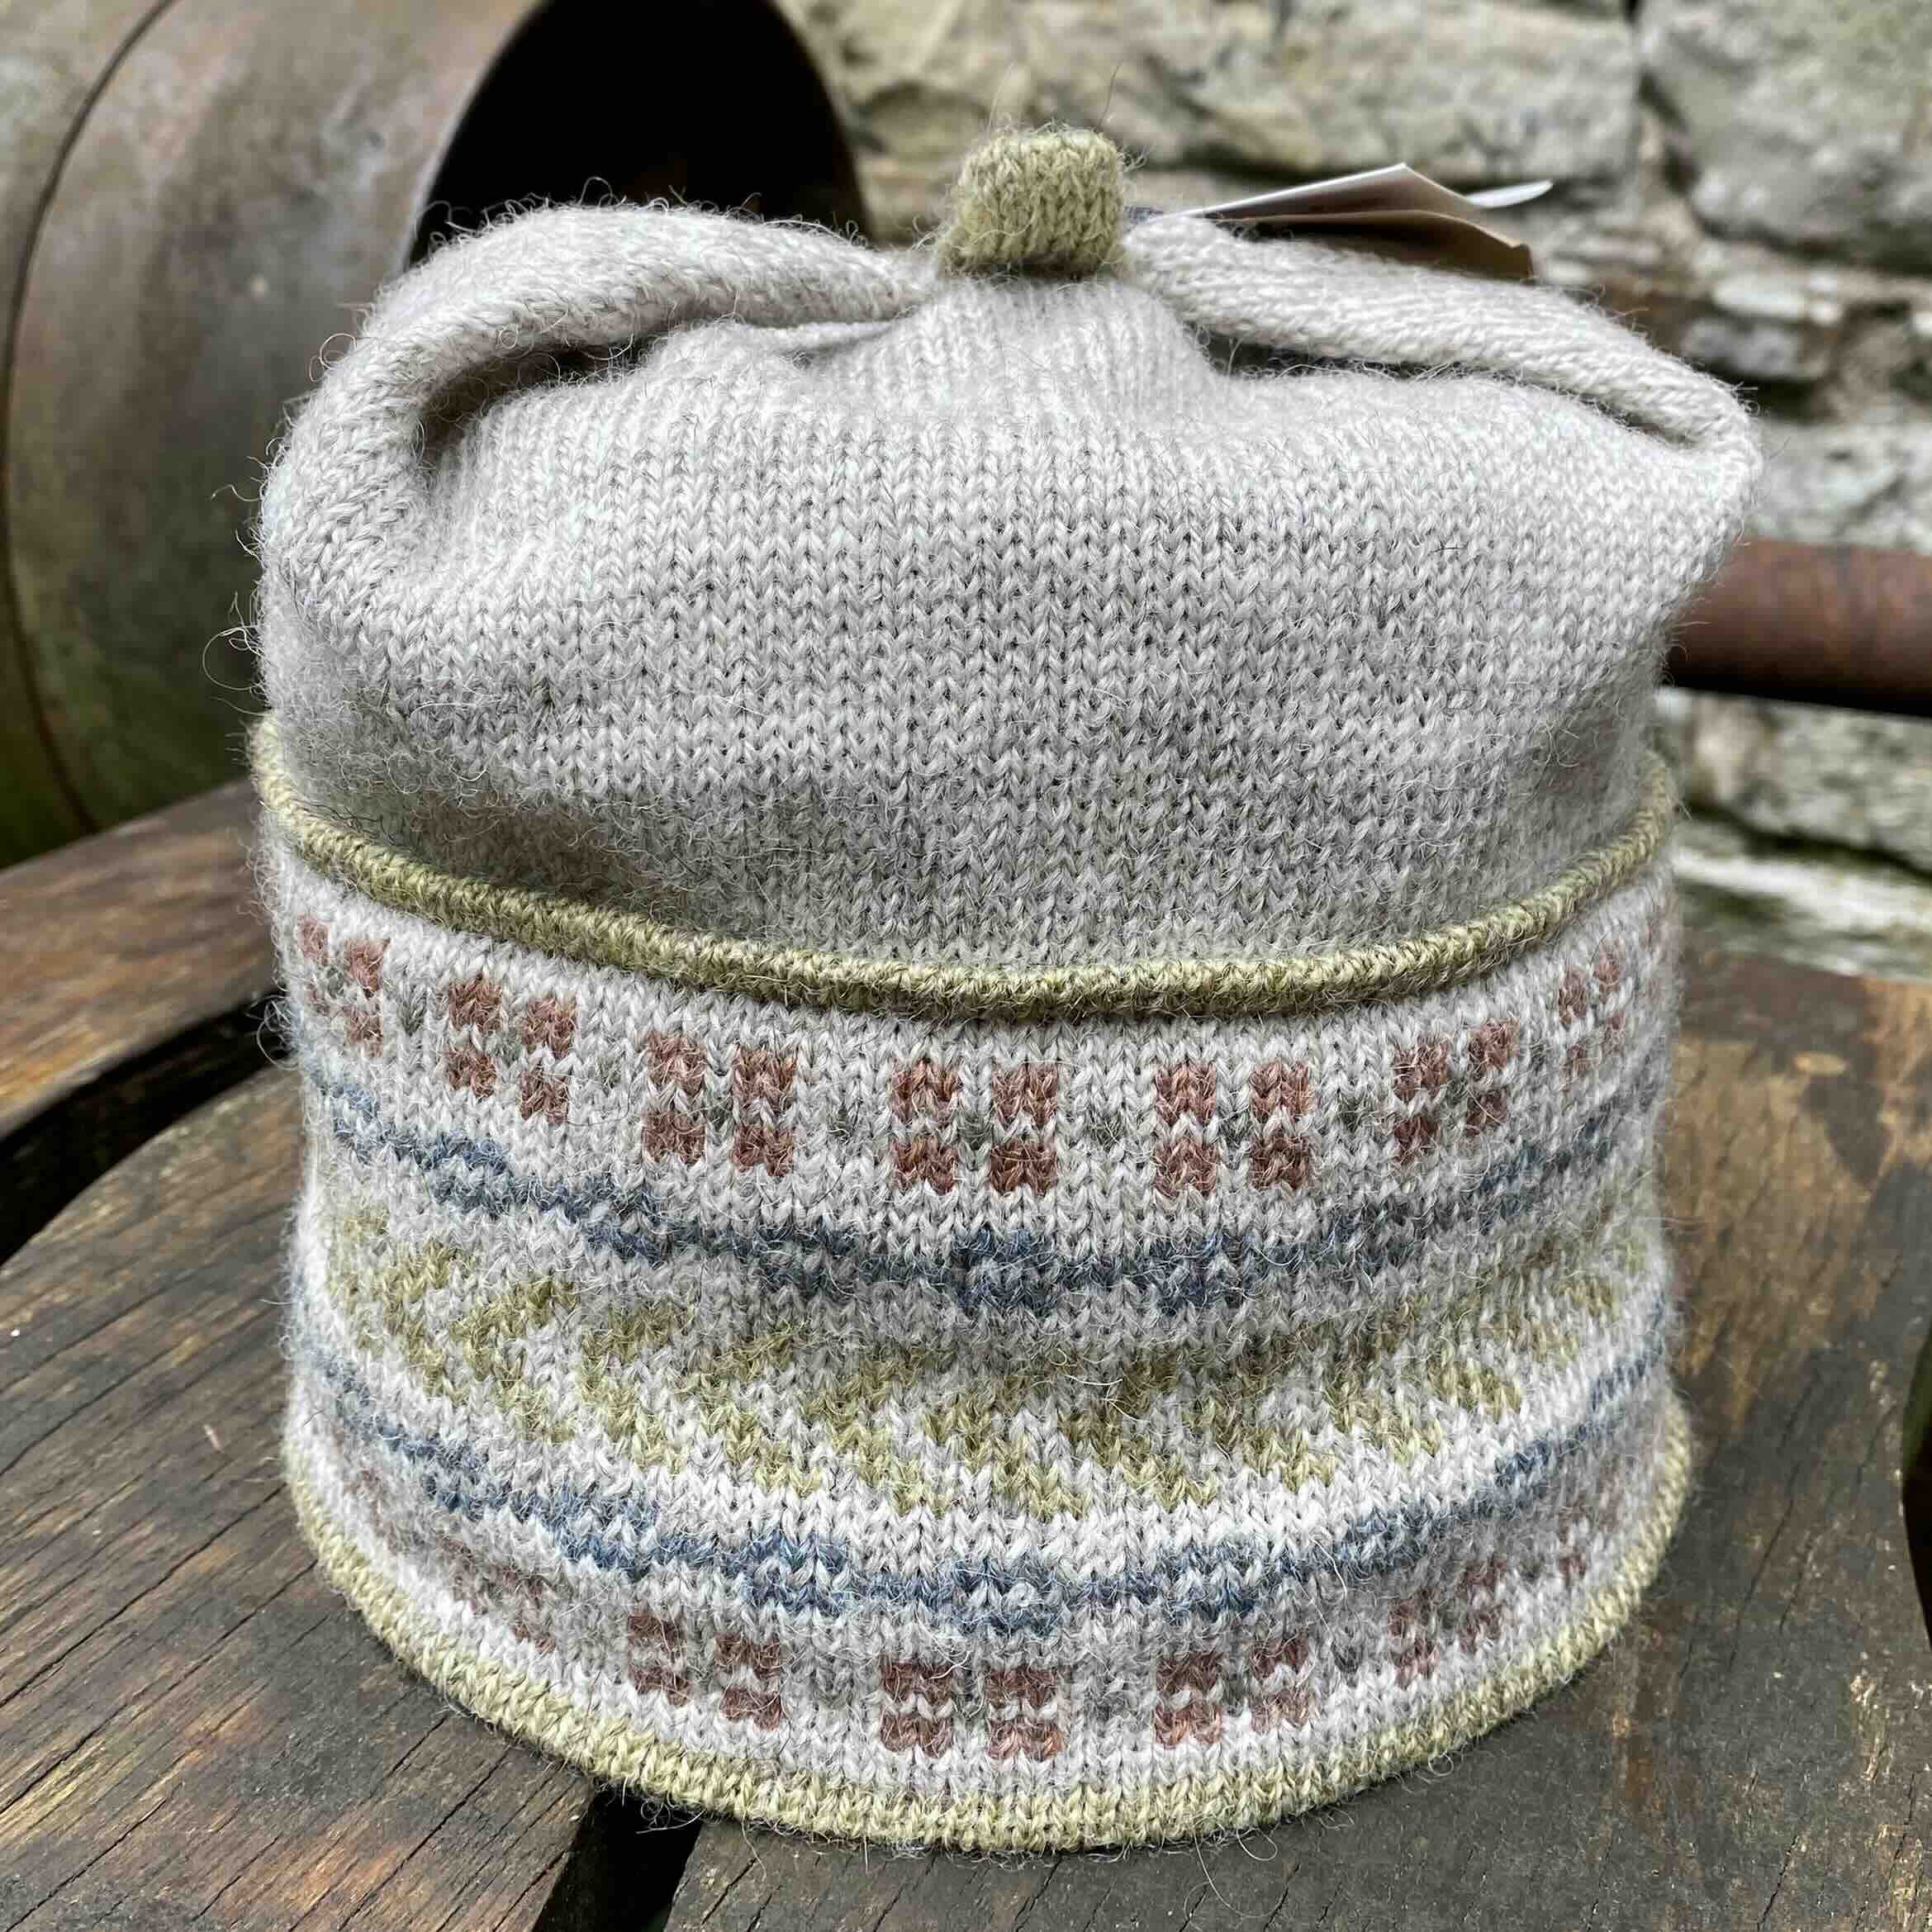 Handframed Knitwear Hat with Turned Brim, in Naturals 